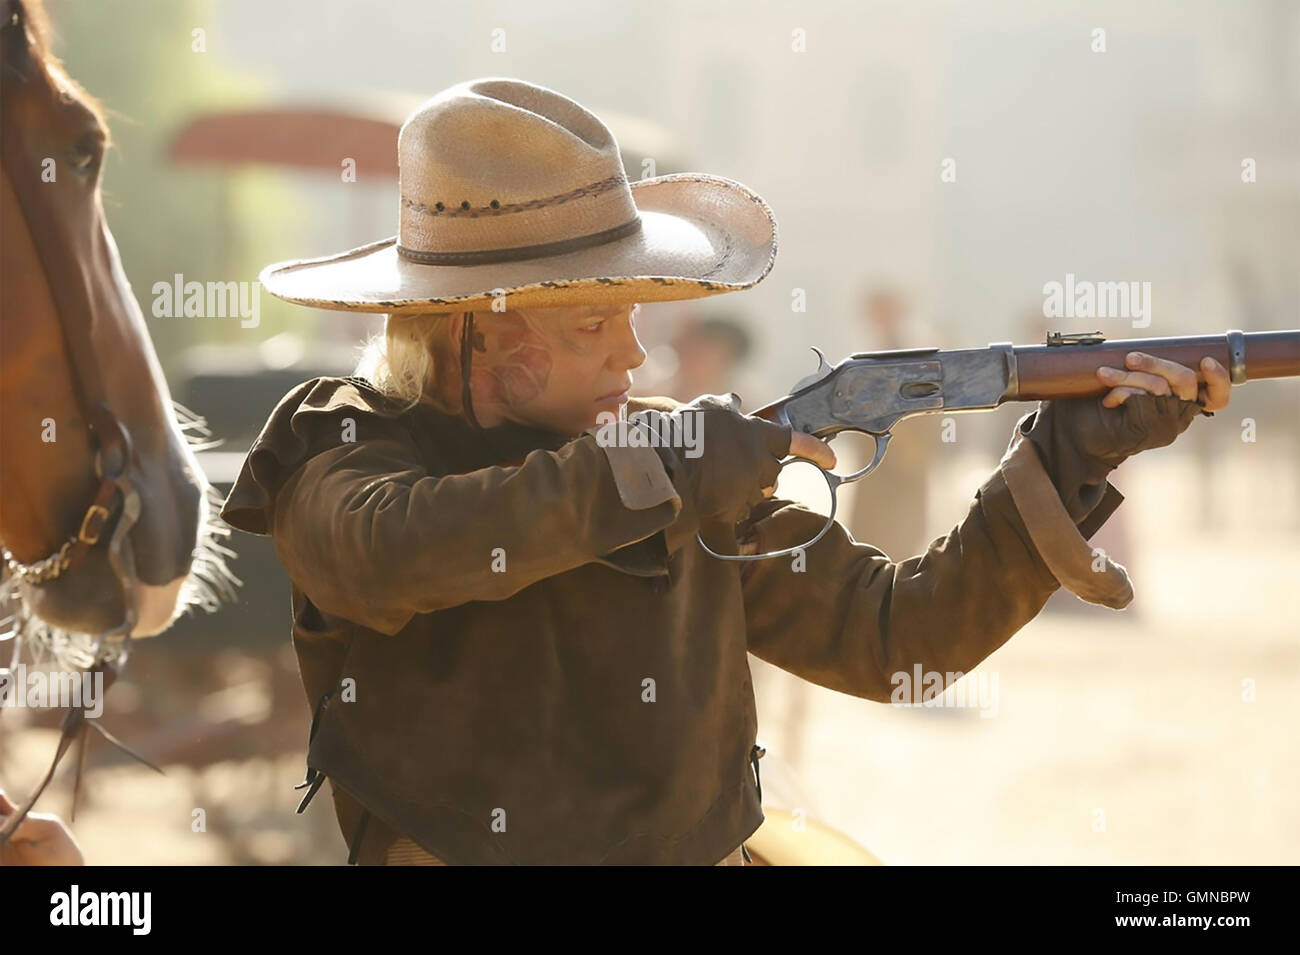 WESTWORLD 2016 US Bad Robot/Jerry Weintraub Productions TV series with Ingrid Bolso Berdal Stock Photo